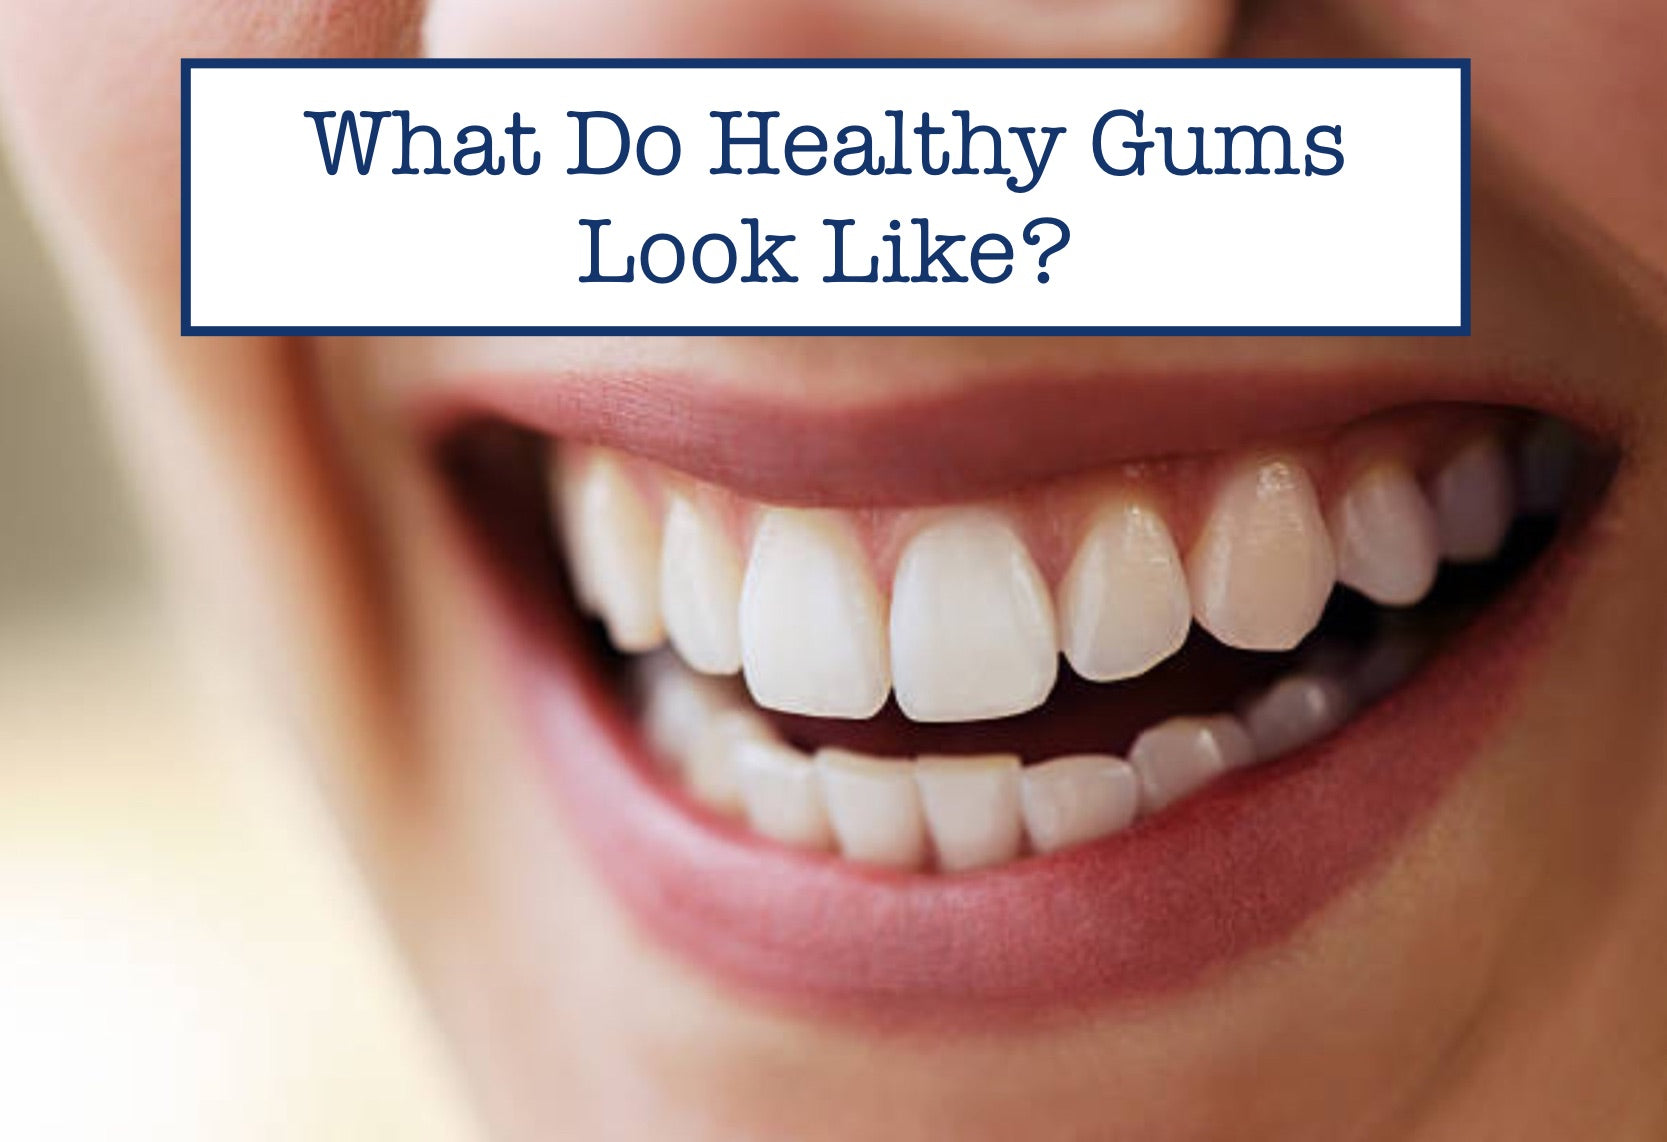 What Do Healthy Gums Look Like?